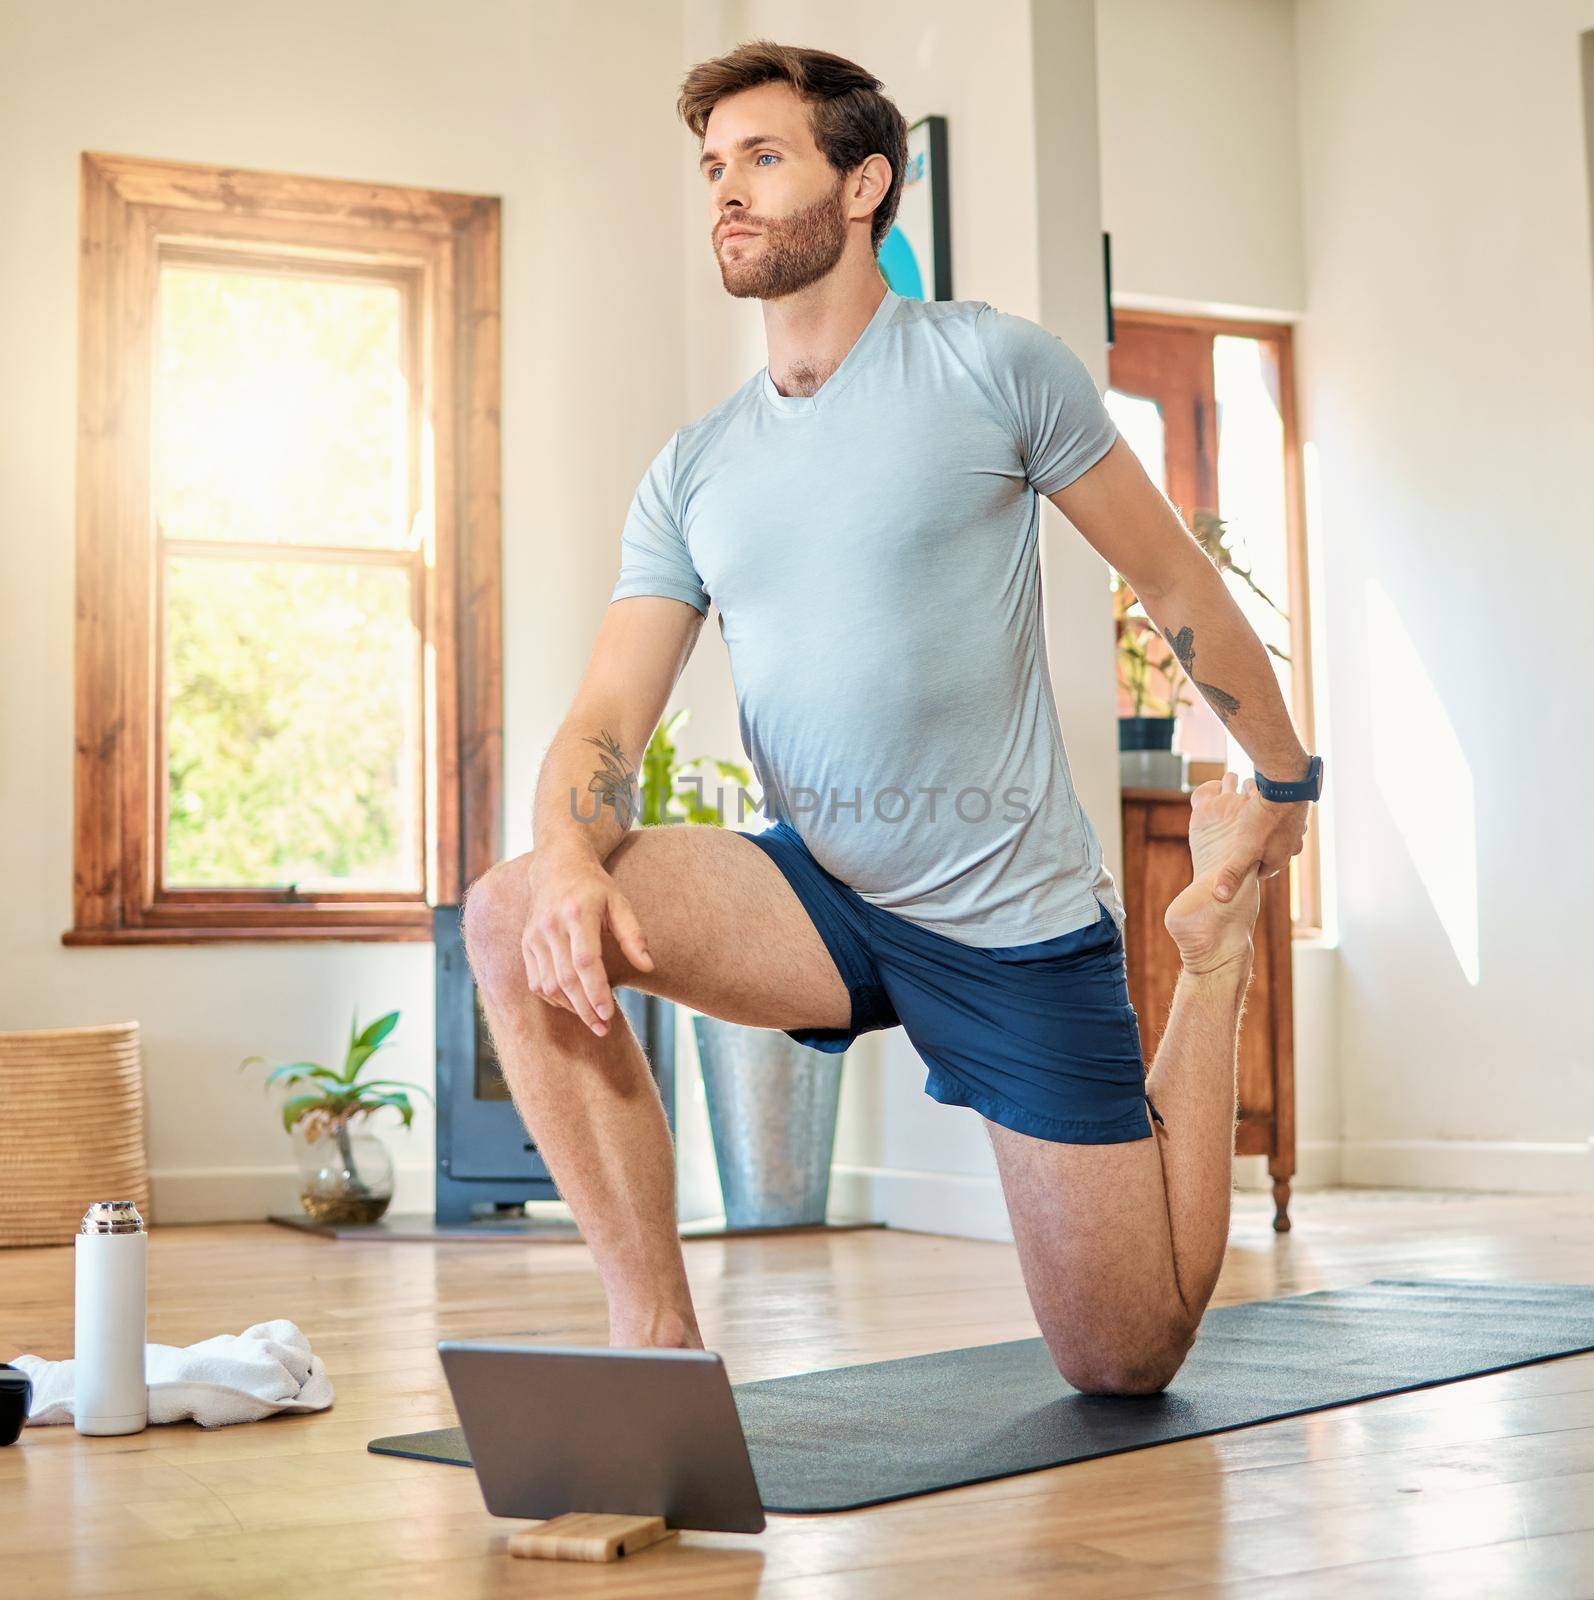 One fit young caucasian man stretching legs with lunge bodyweight exercise and holding foot while training with online tutorial on digital tablet at home. Guy gaining muscle, endurance, balance and core strength during yoga workout.